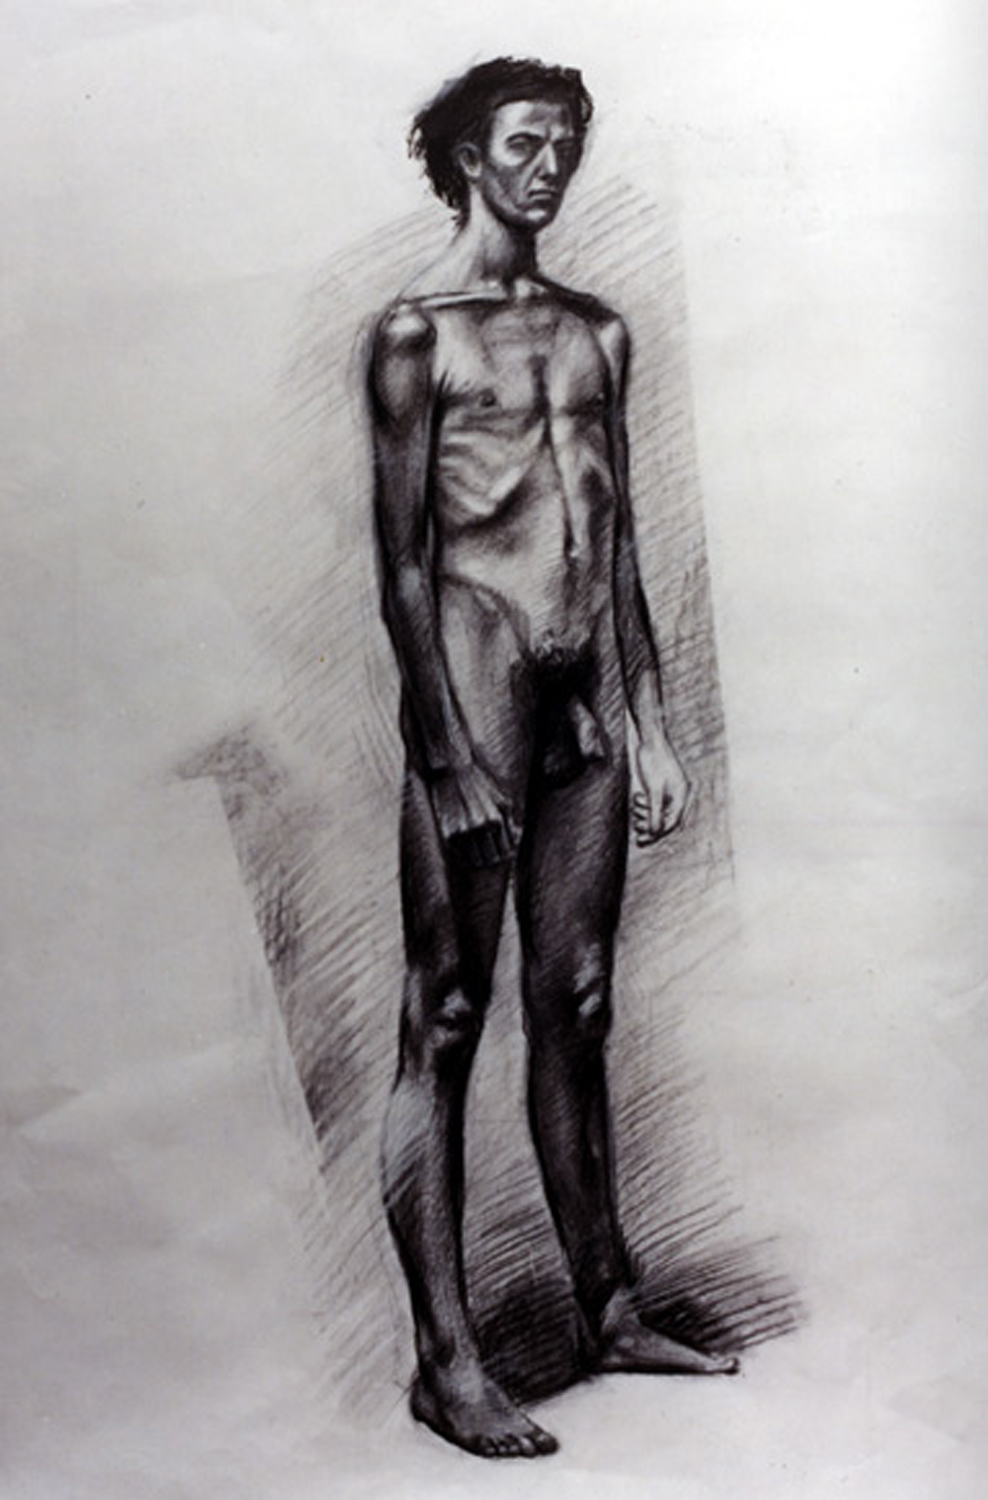 Nude Self Portrait (as a Teenager)